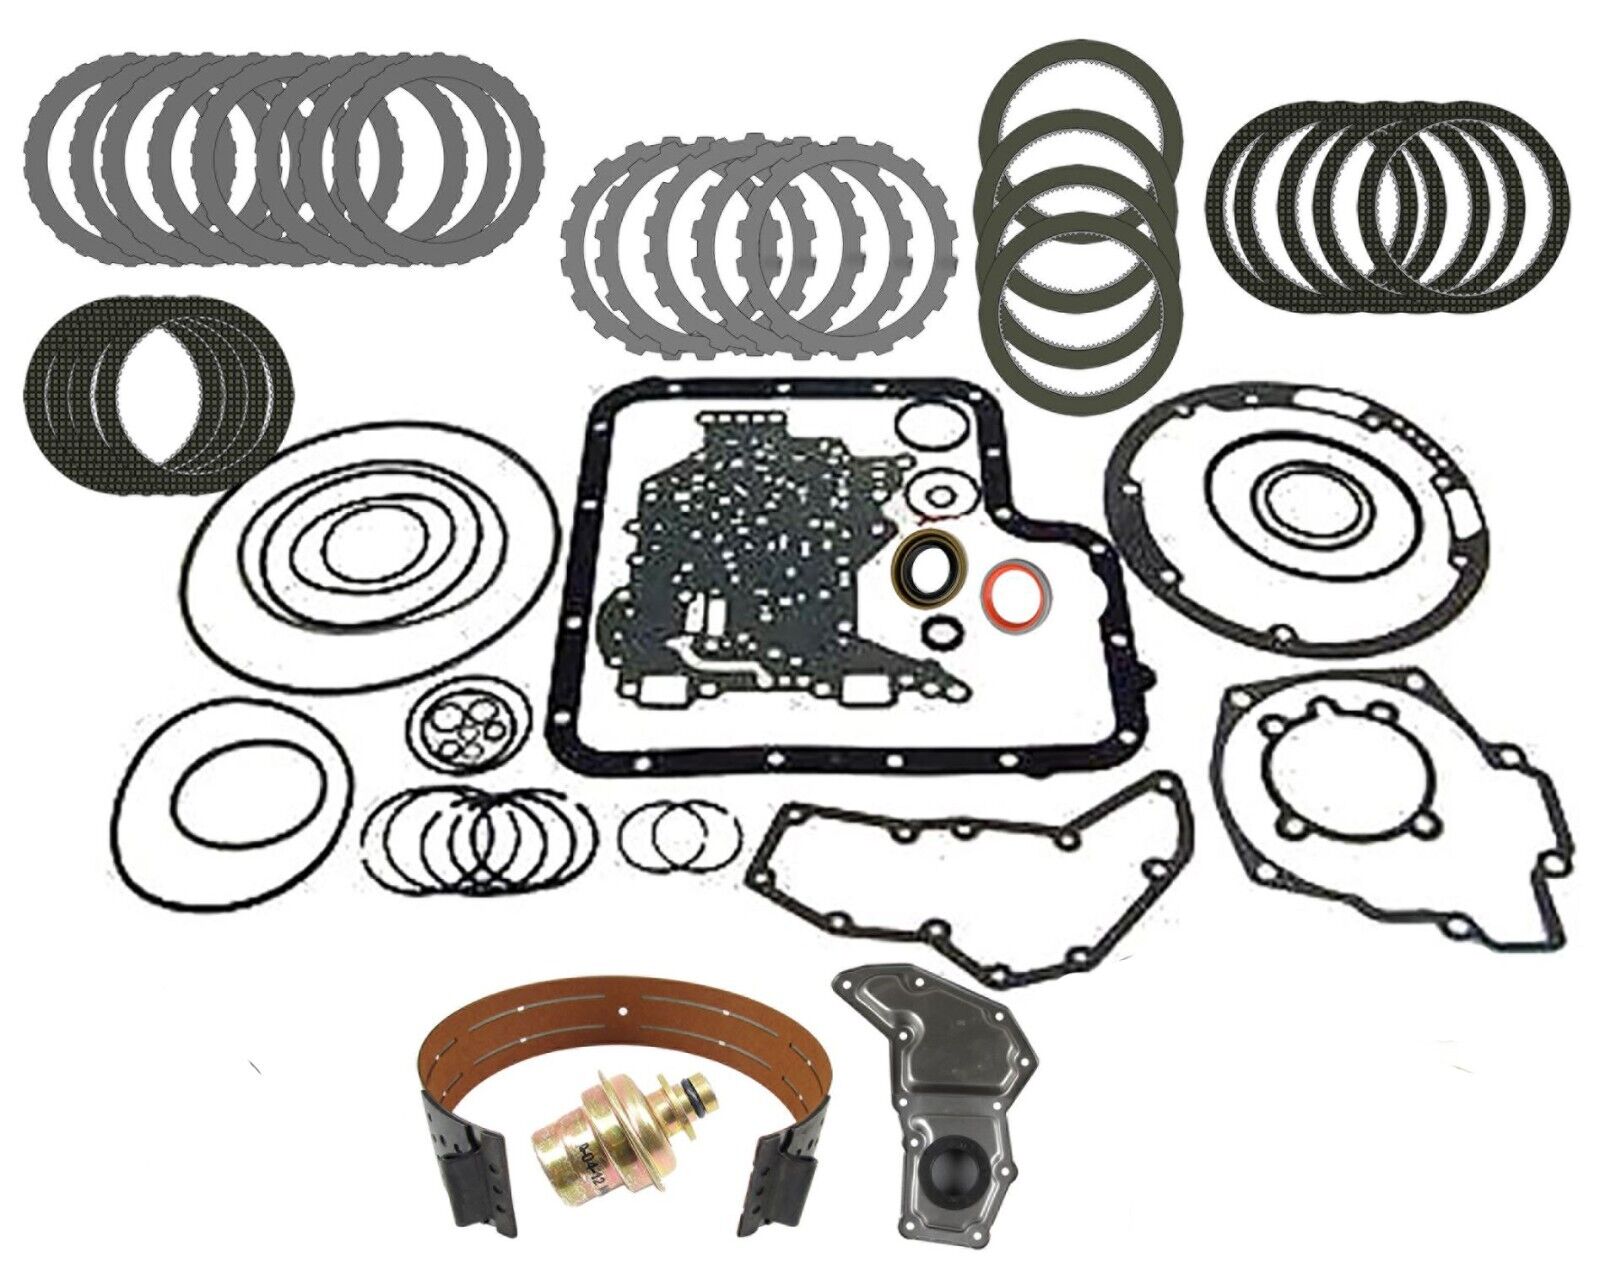 Ford C-6 Deluxe-Series Master Rebuild Kit fits 1976-96 4WD Pick Up & Bronco